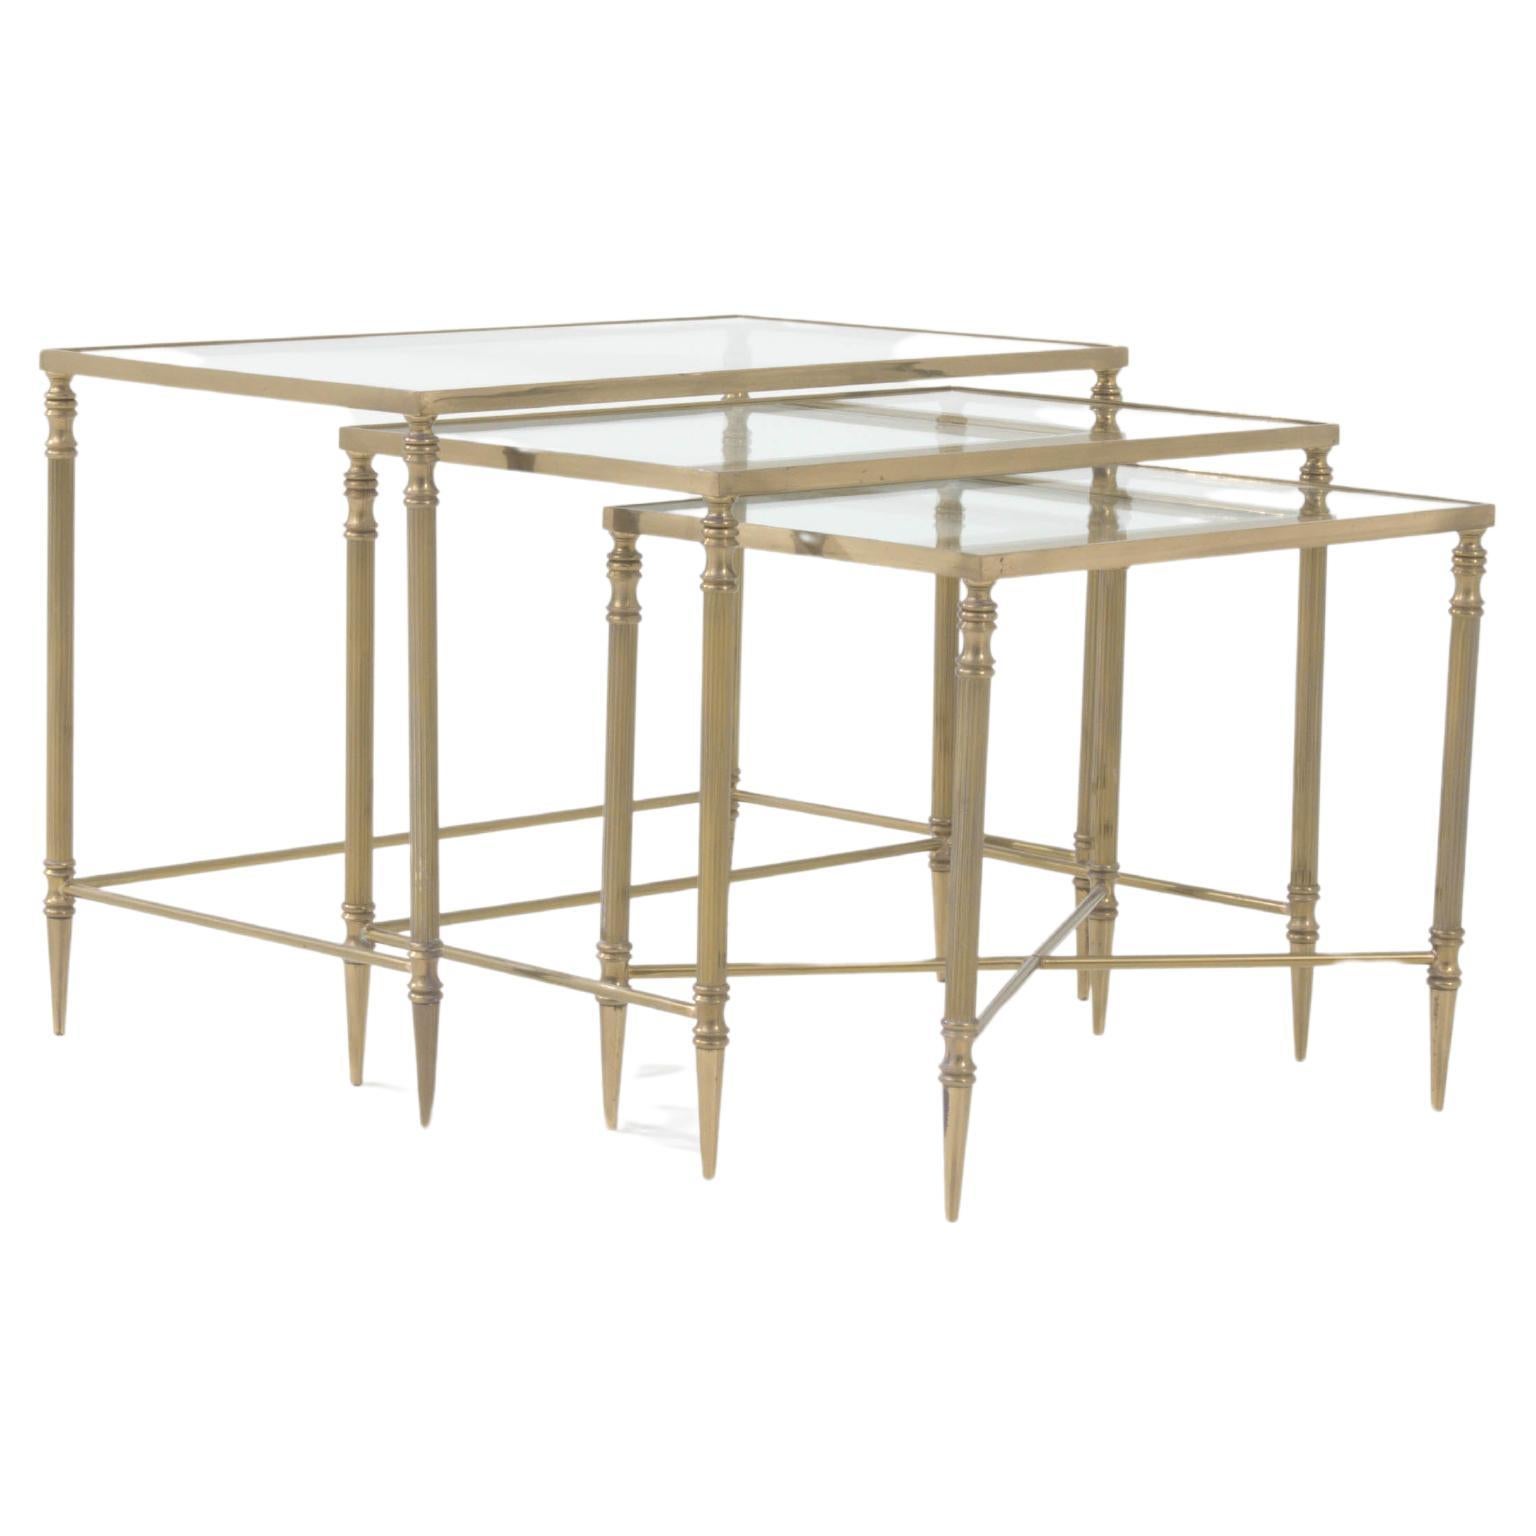 20th Century French Brass Nesting Tables With Glass Tops